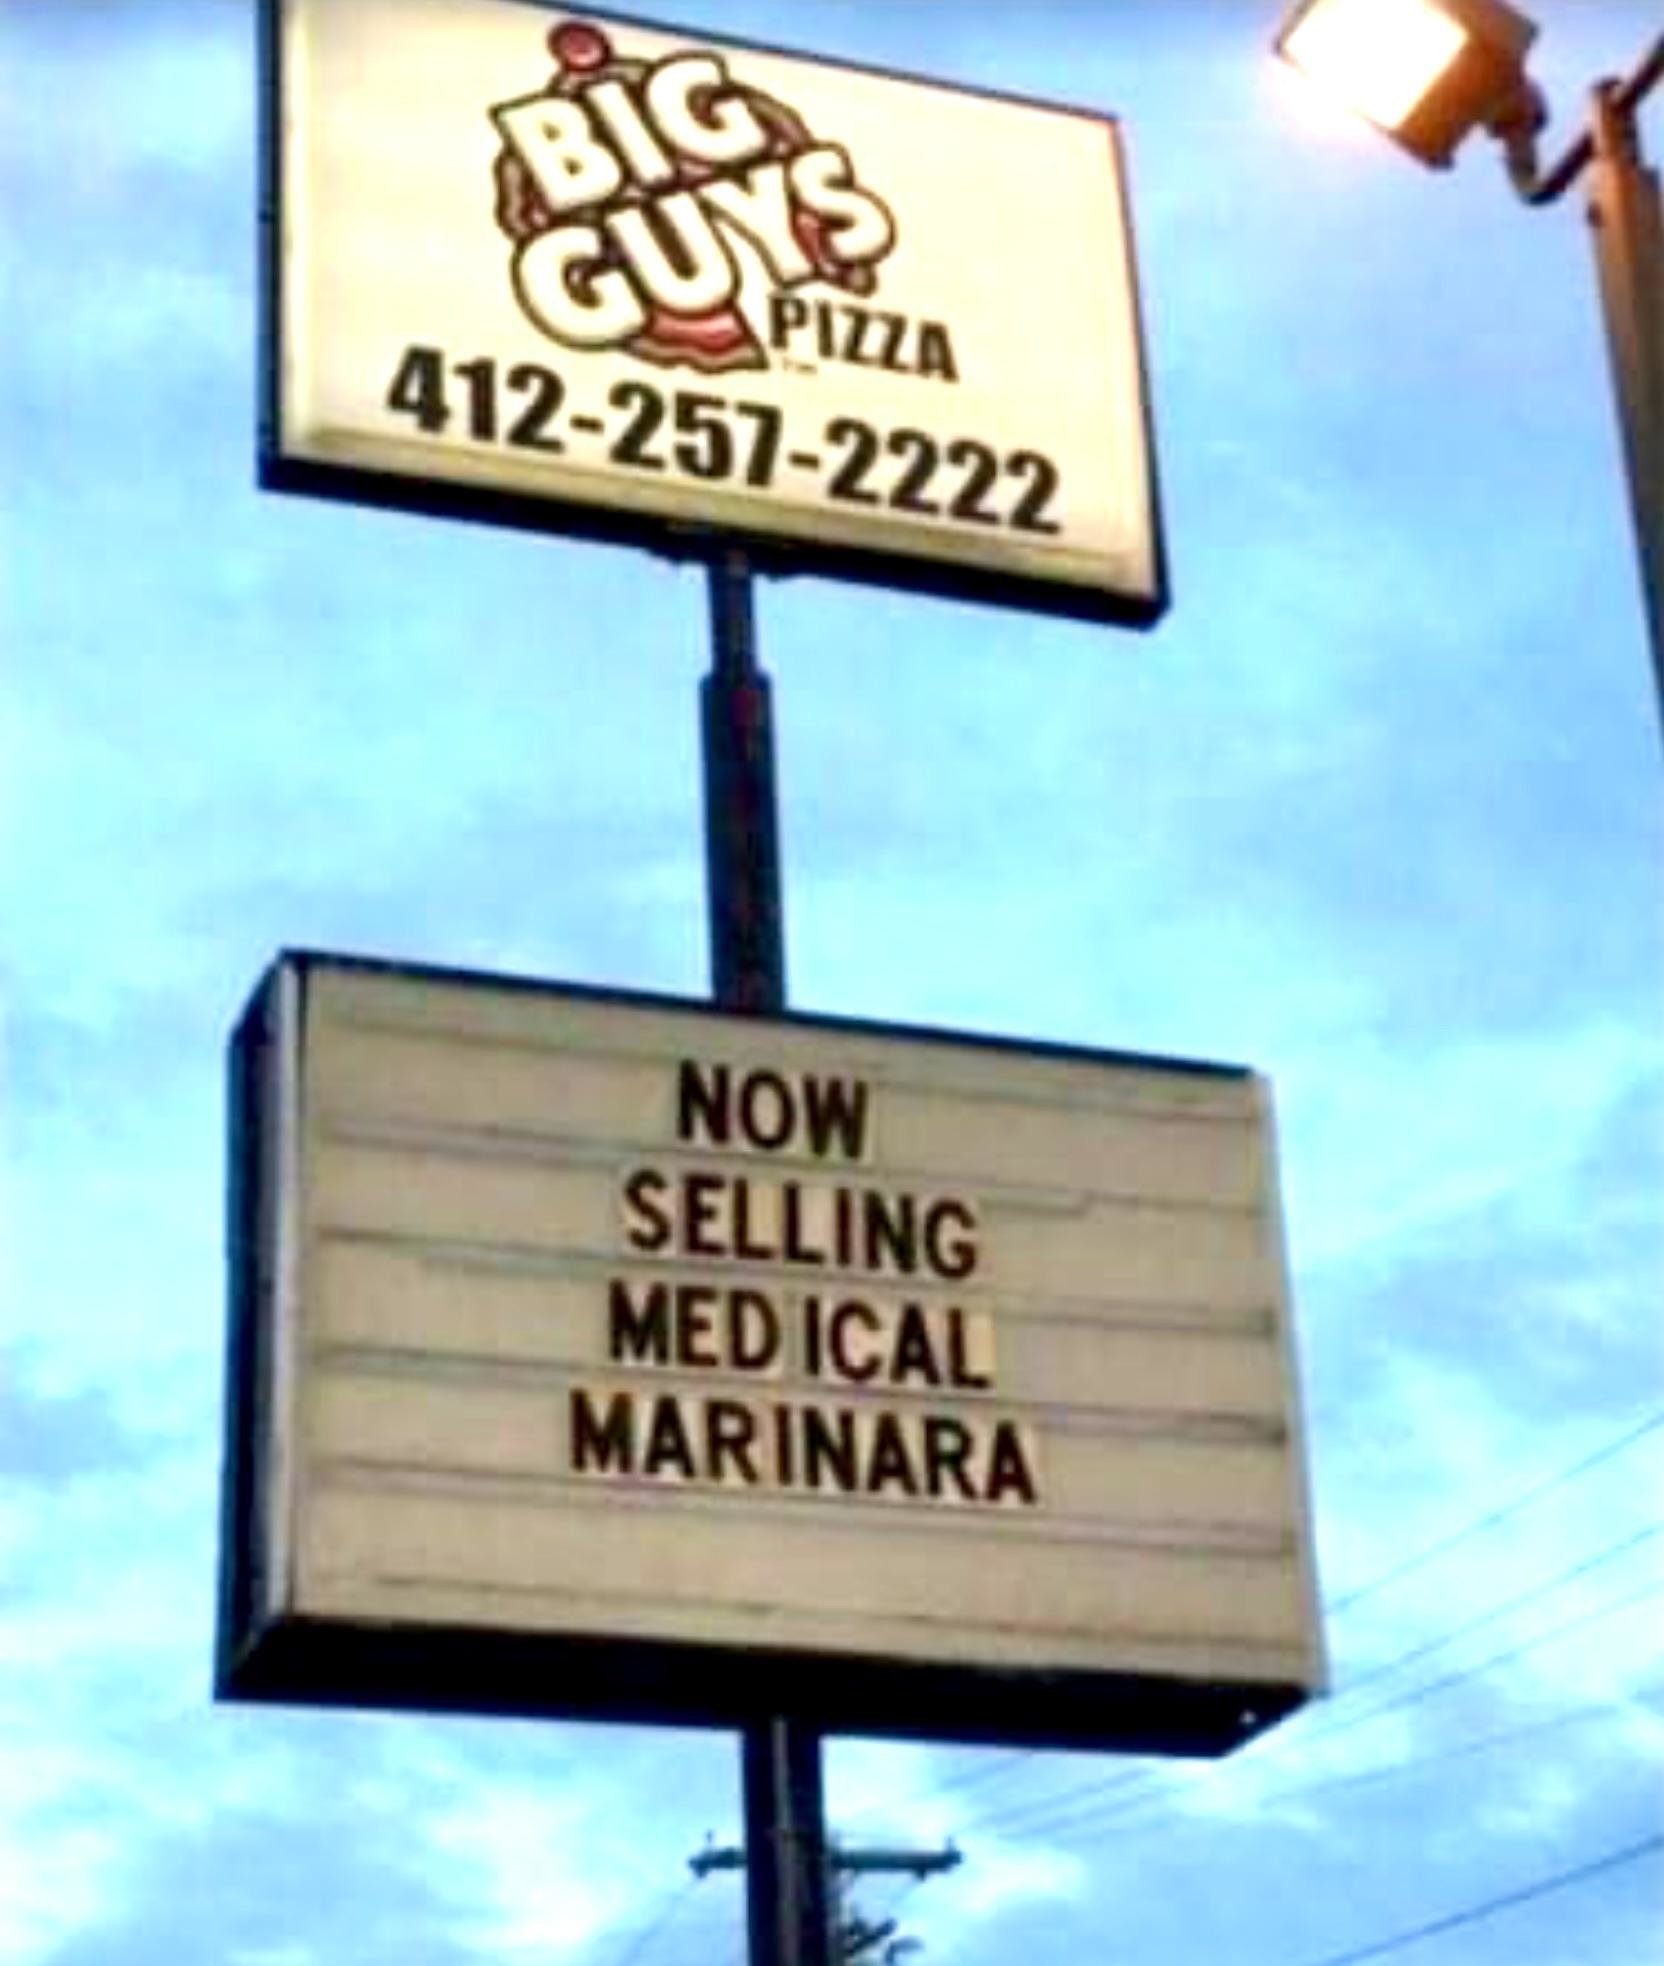 Sign for a pizza place that says &quot;Now selling medical marinara&quot;